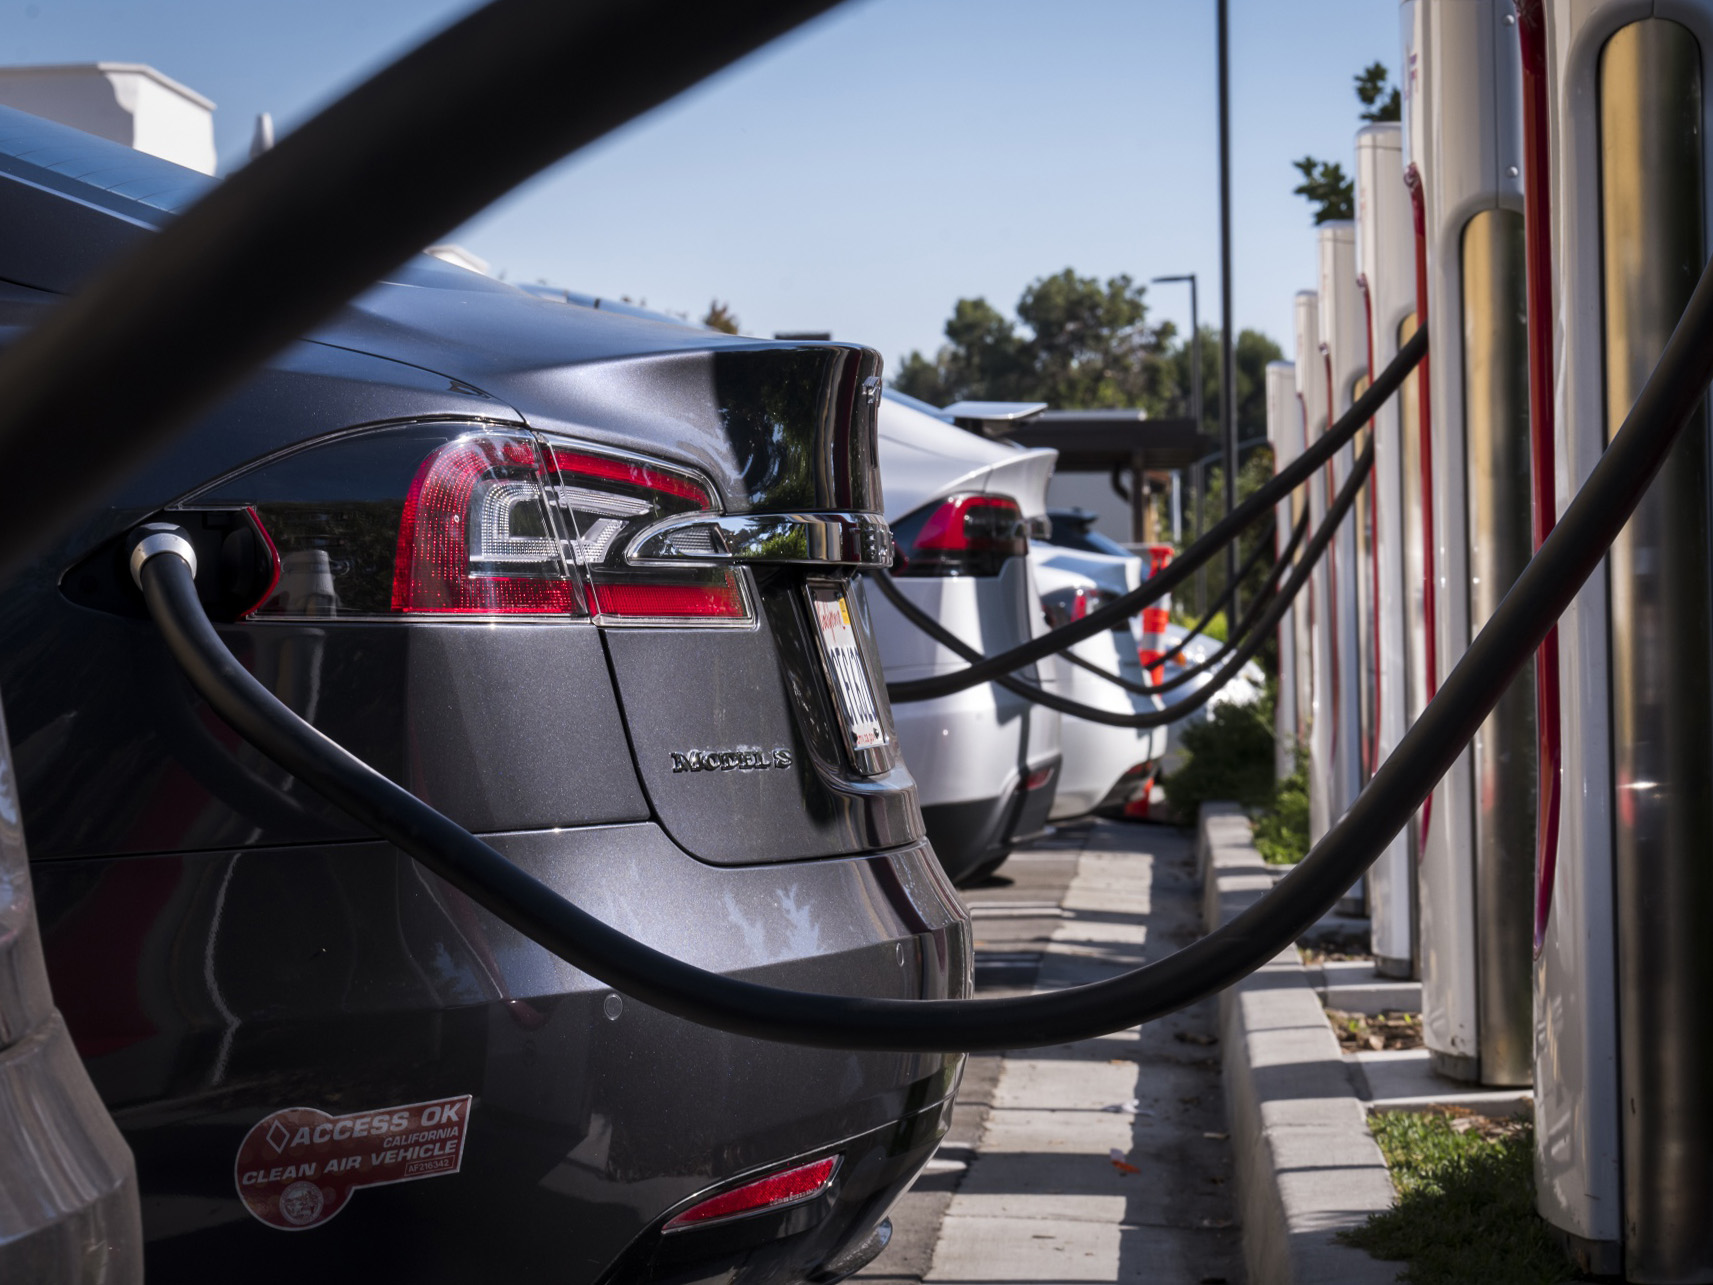 Demand for electric cars is booming, with sales expected to leap